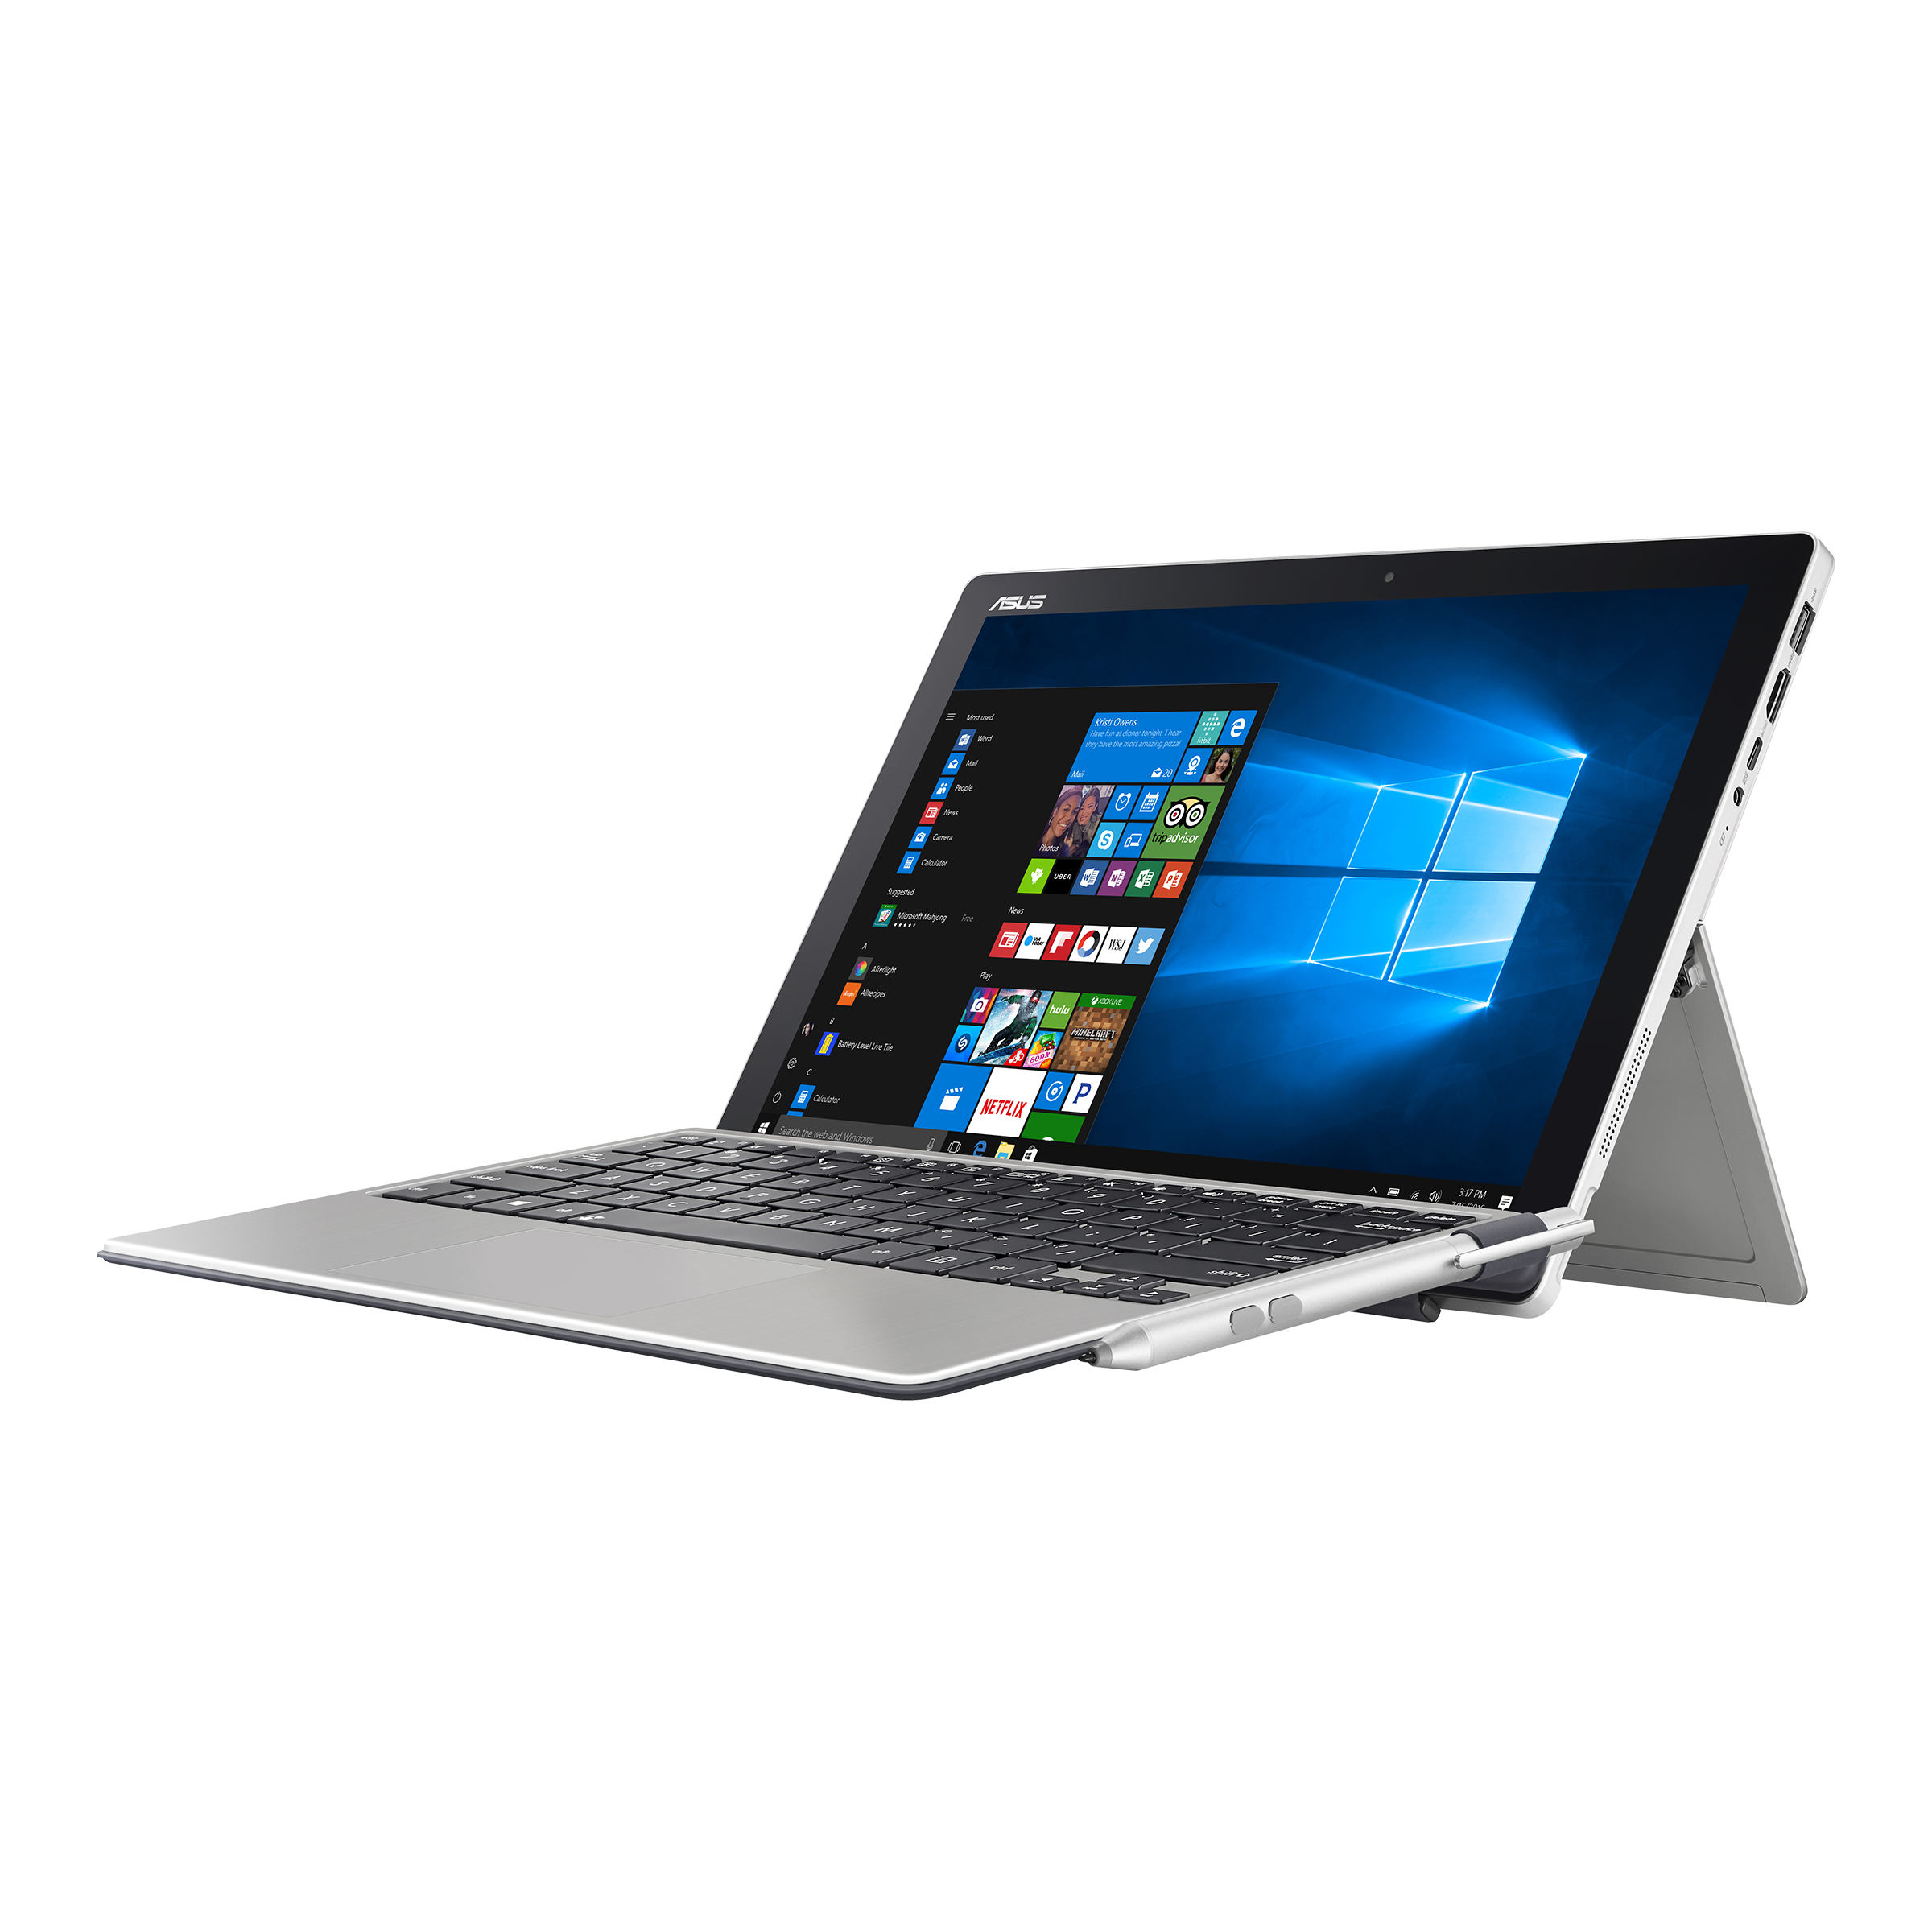 ASUS Transformer Pro T304｜Laptops For Students｜ASUS Global